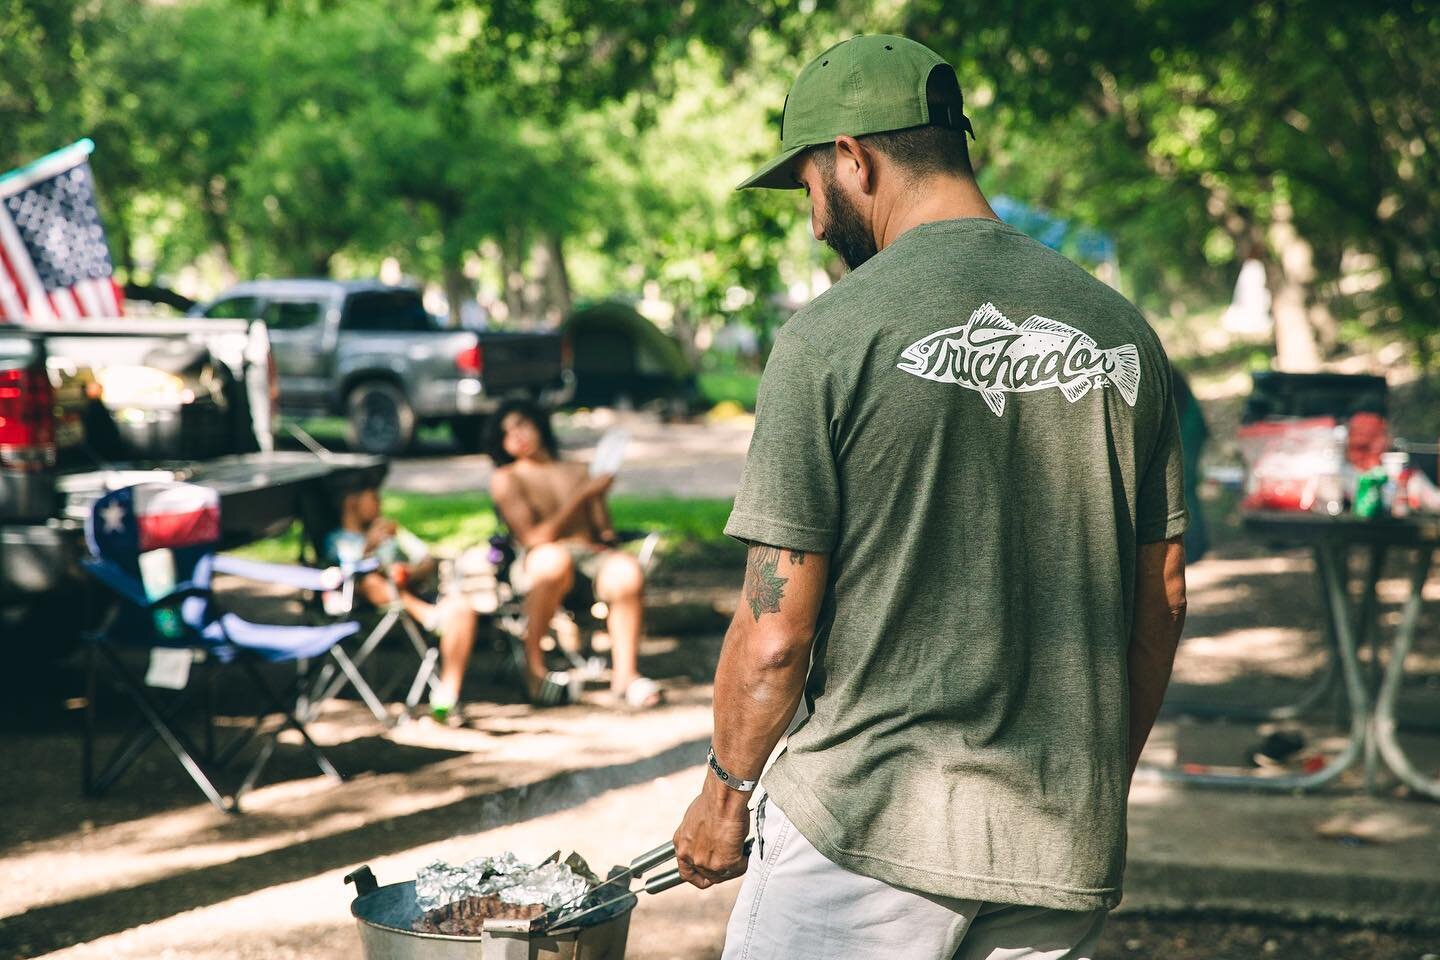 Nothing better then camping, the smell of the grill, cold beer, and  making memories with the family.  Also it&rsquo;s rare to see me cook. I actually hate cooking, so you know I have to take a photo of me doing it. 🤣
#forthegram
@truchadorandco